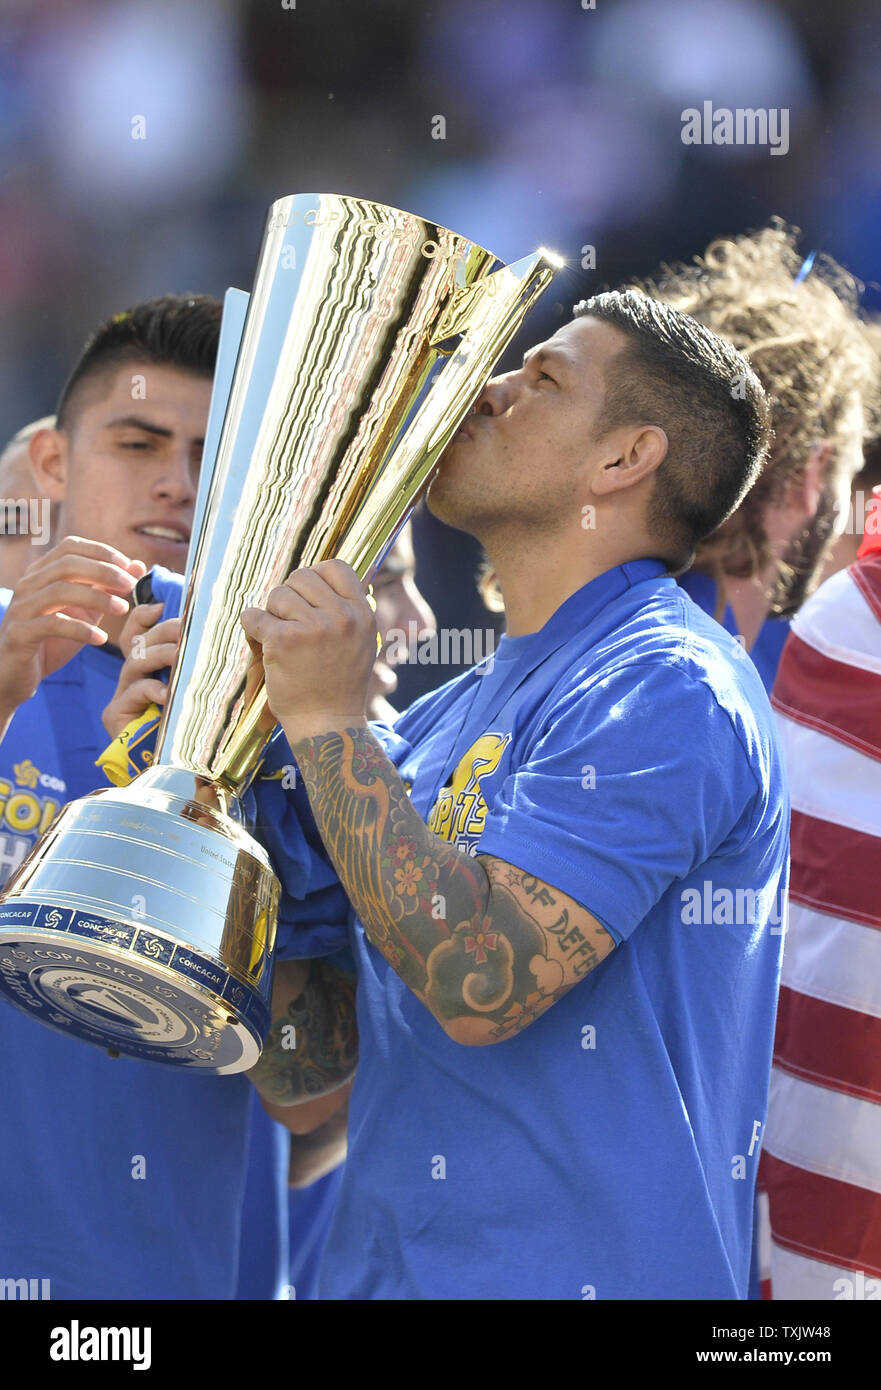 United States goalkeeper Nick Rimando kisses the Gold Cup after defeating Panama in the 2013 CONCACAF Gold Cup Final at Soldier Field in Chicago on July 28, 2013. The United States won 1-0.     UPI/Brian Kersey Stock Photo